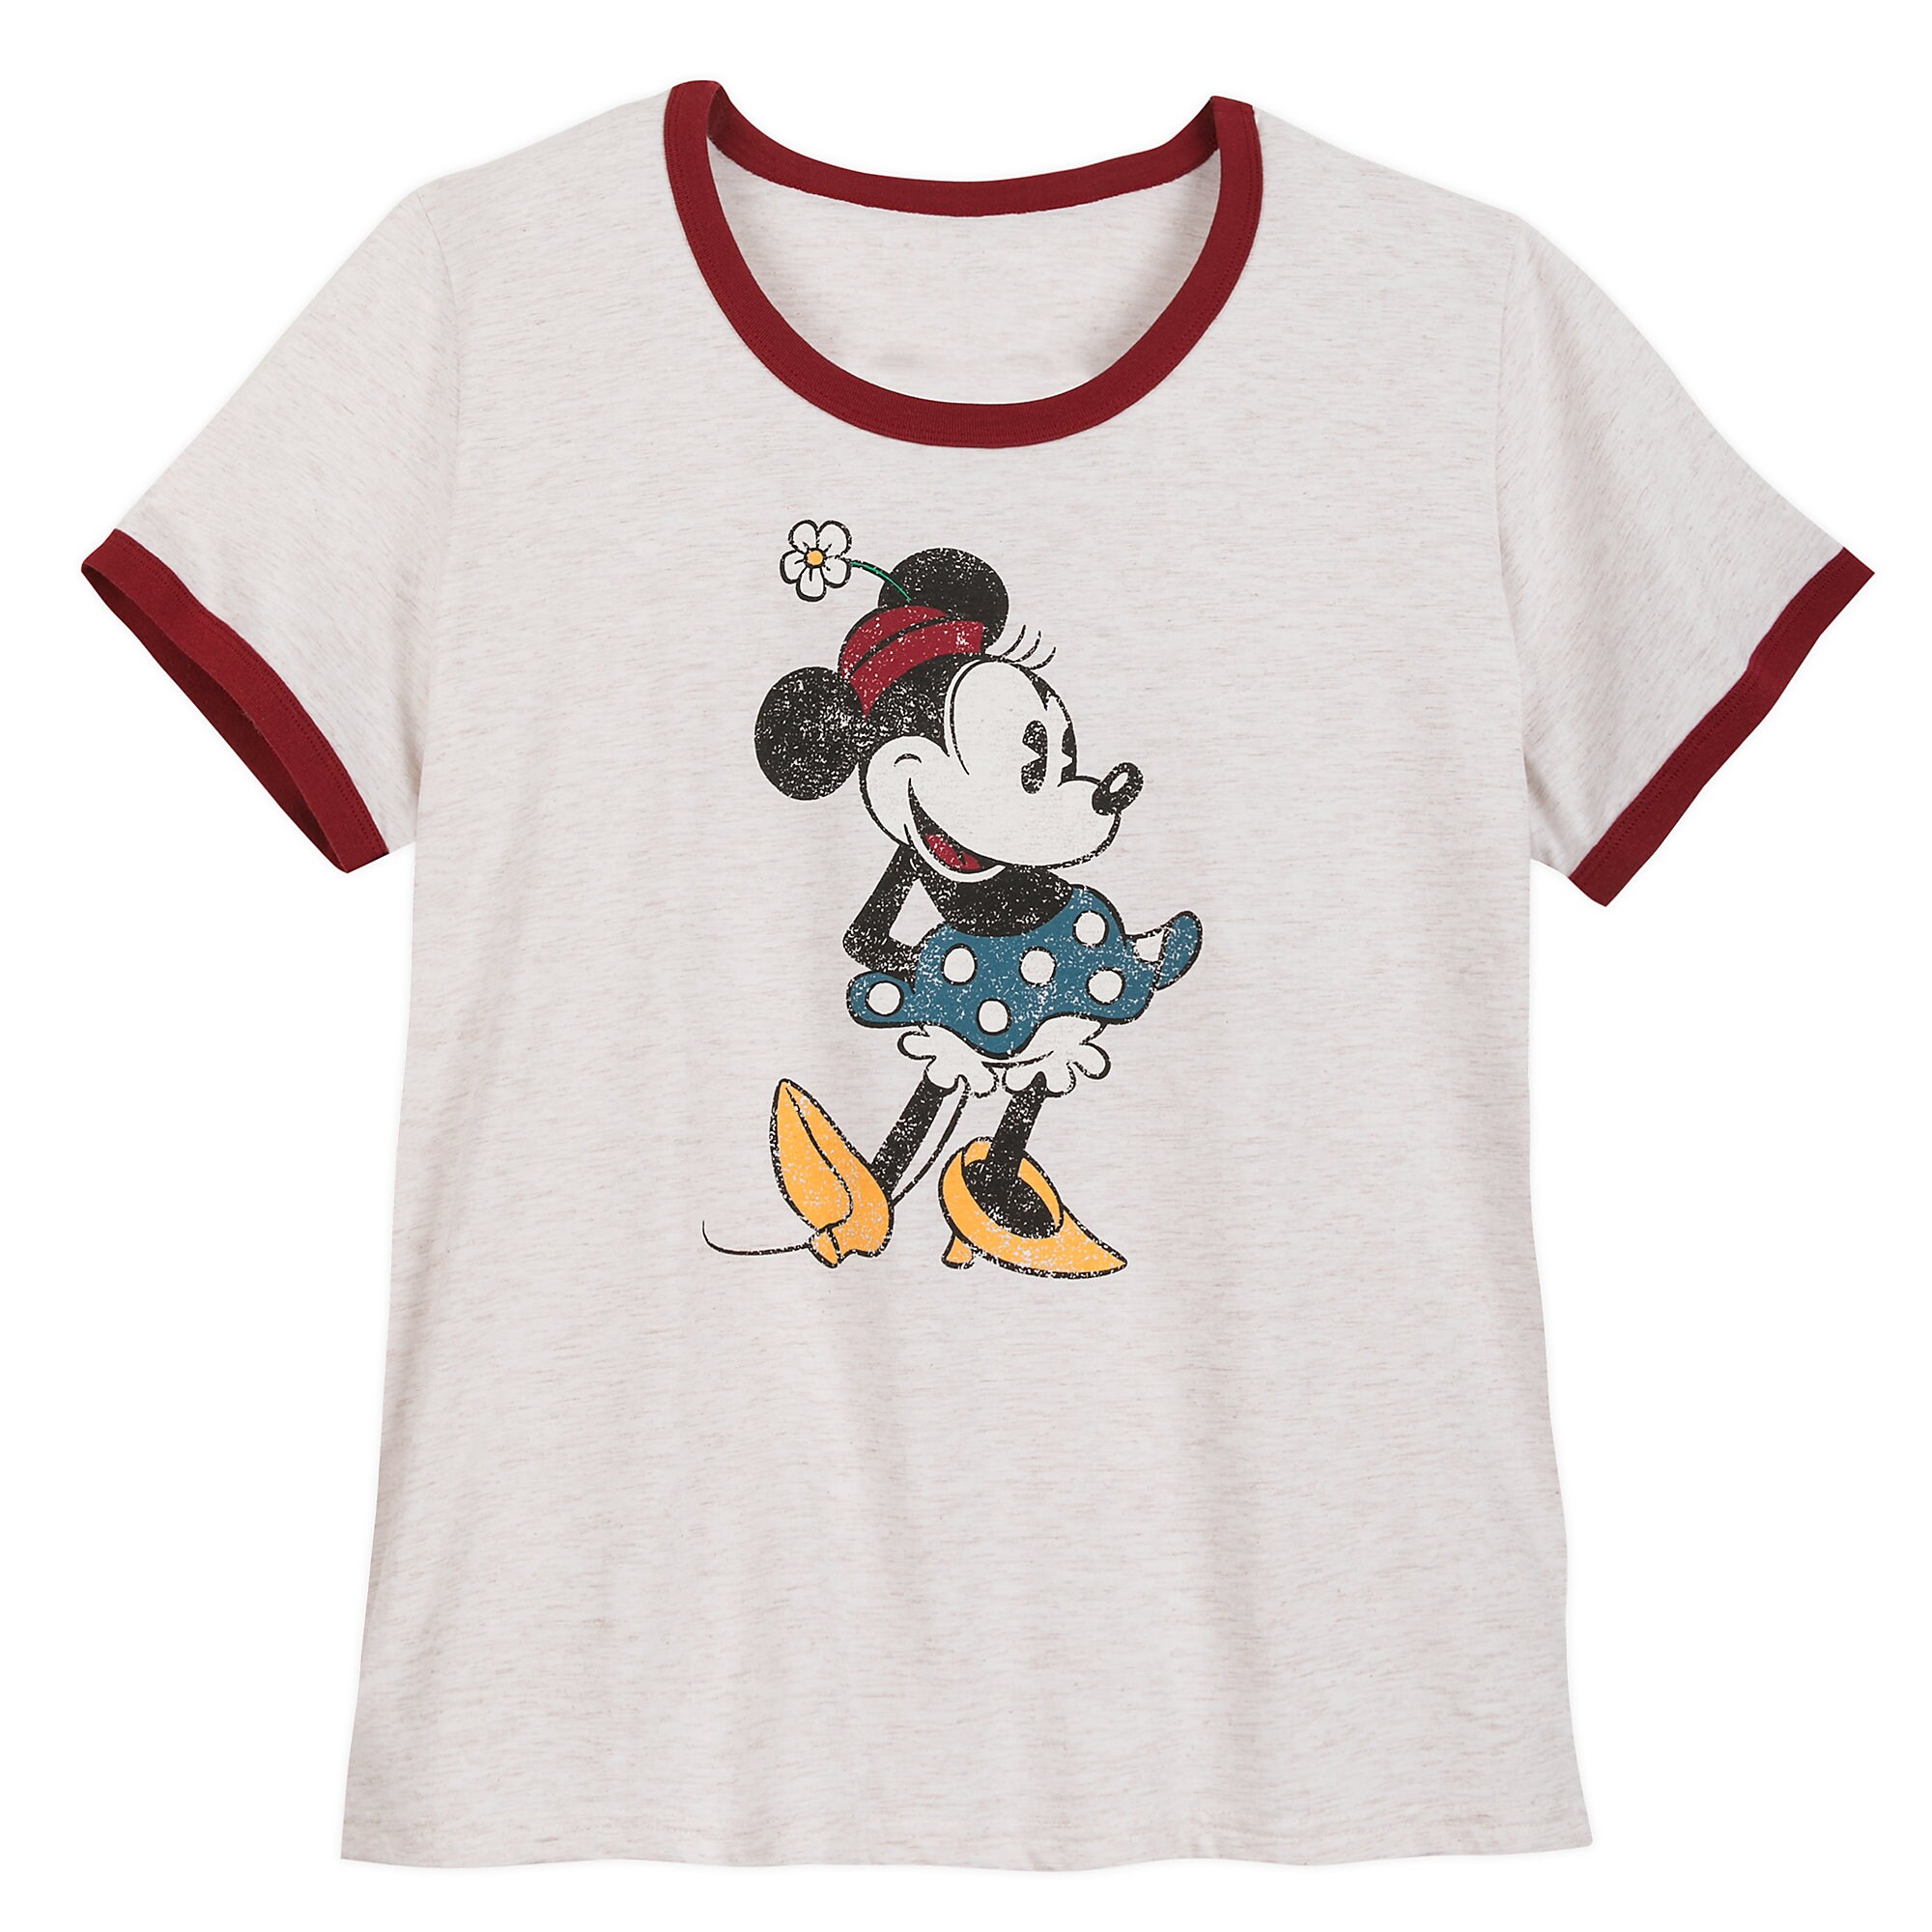 Minnie Mouse Ringer T-Shirt for Women - Extended Size